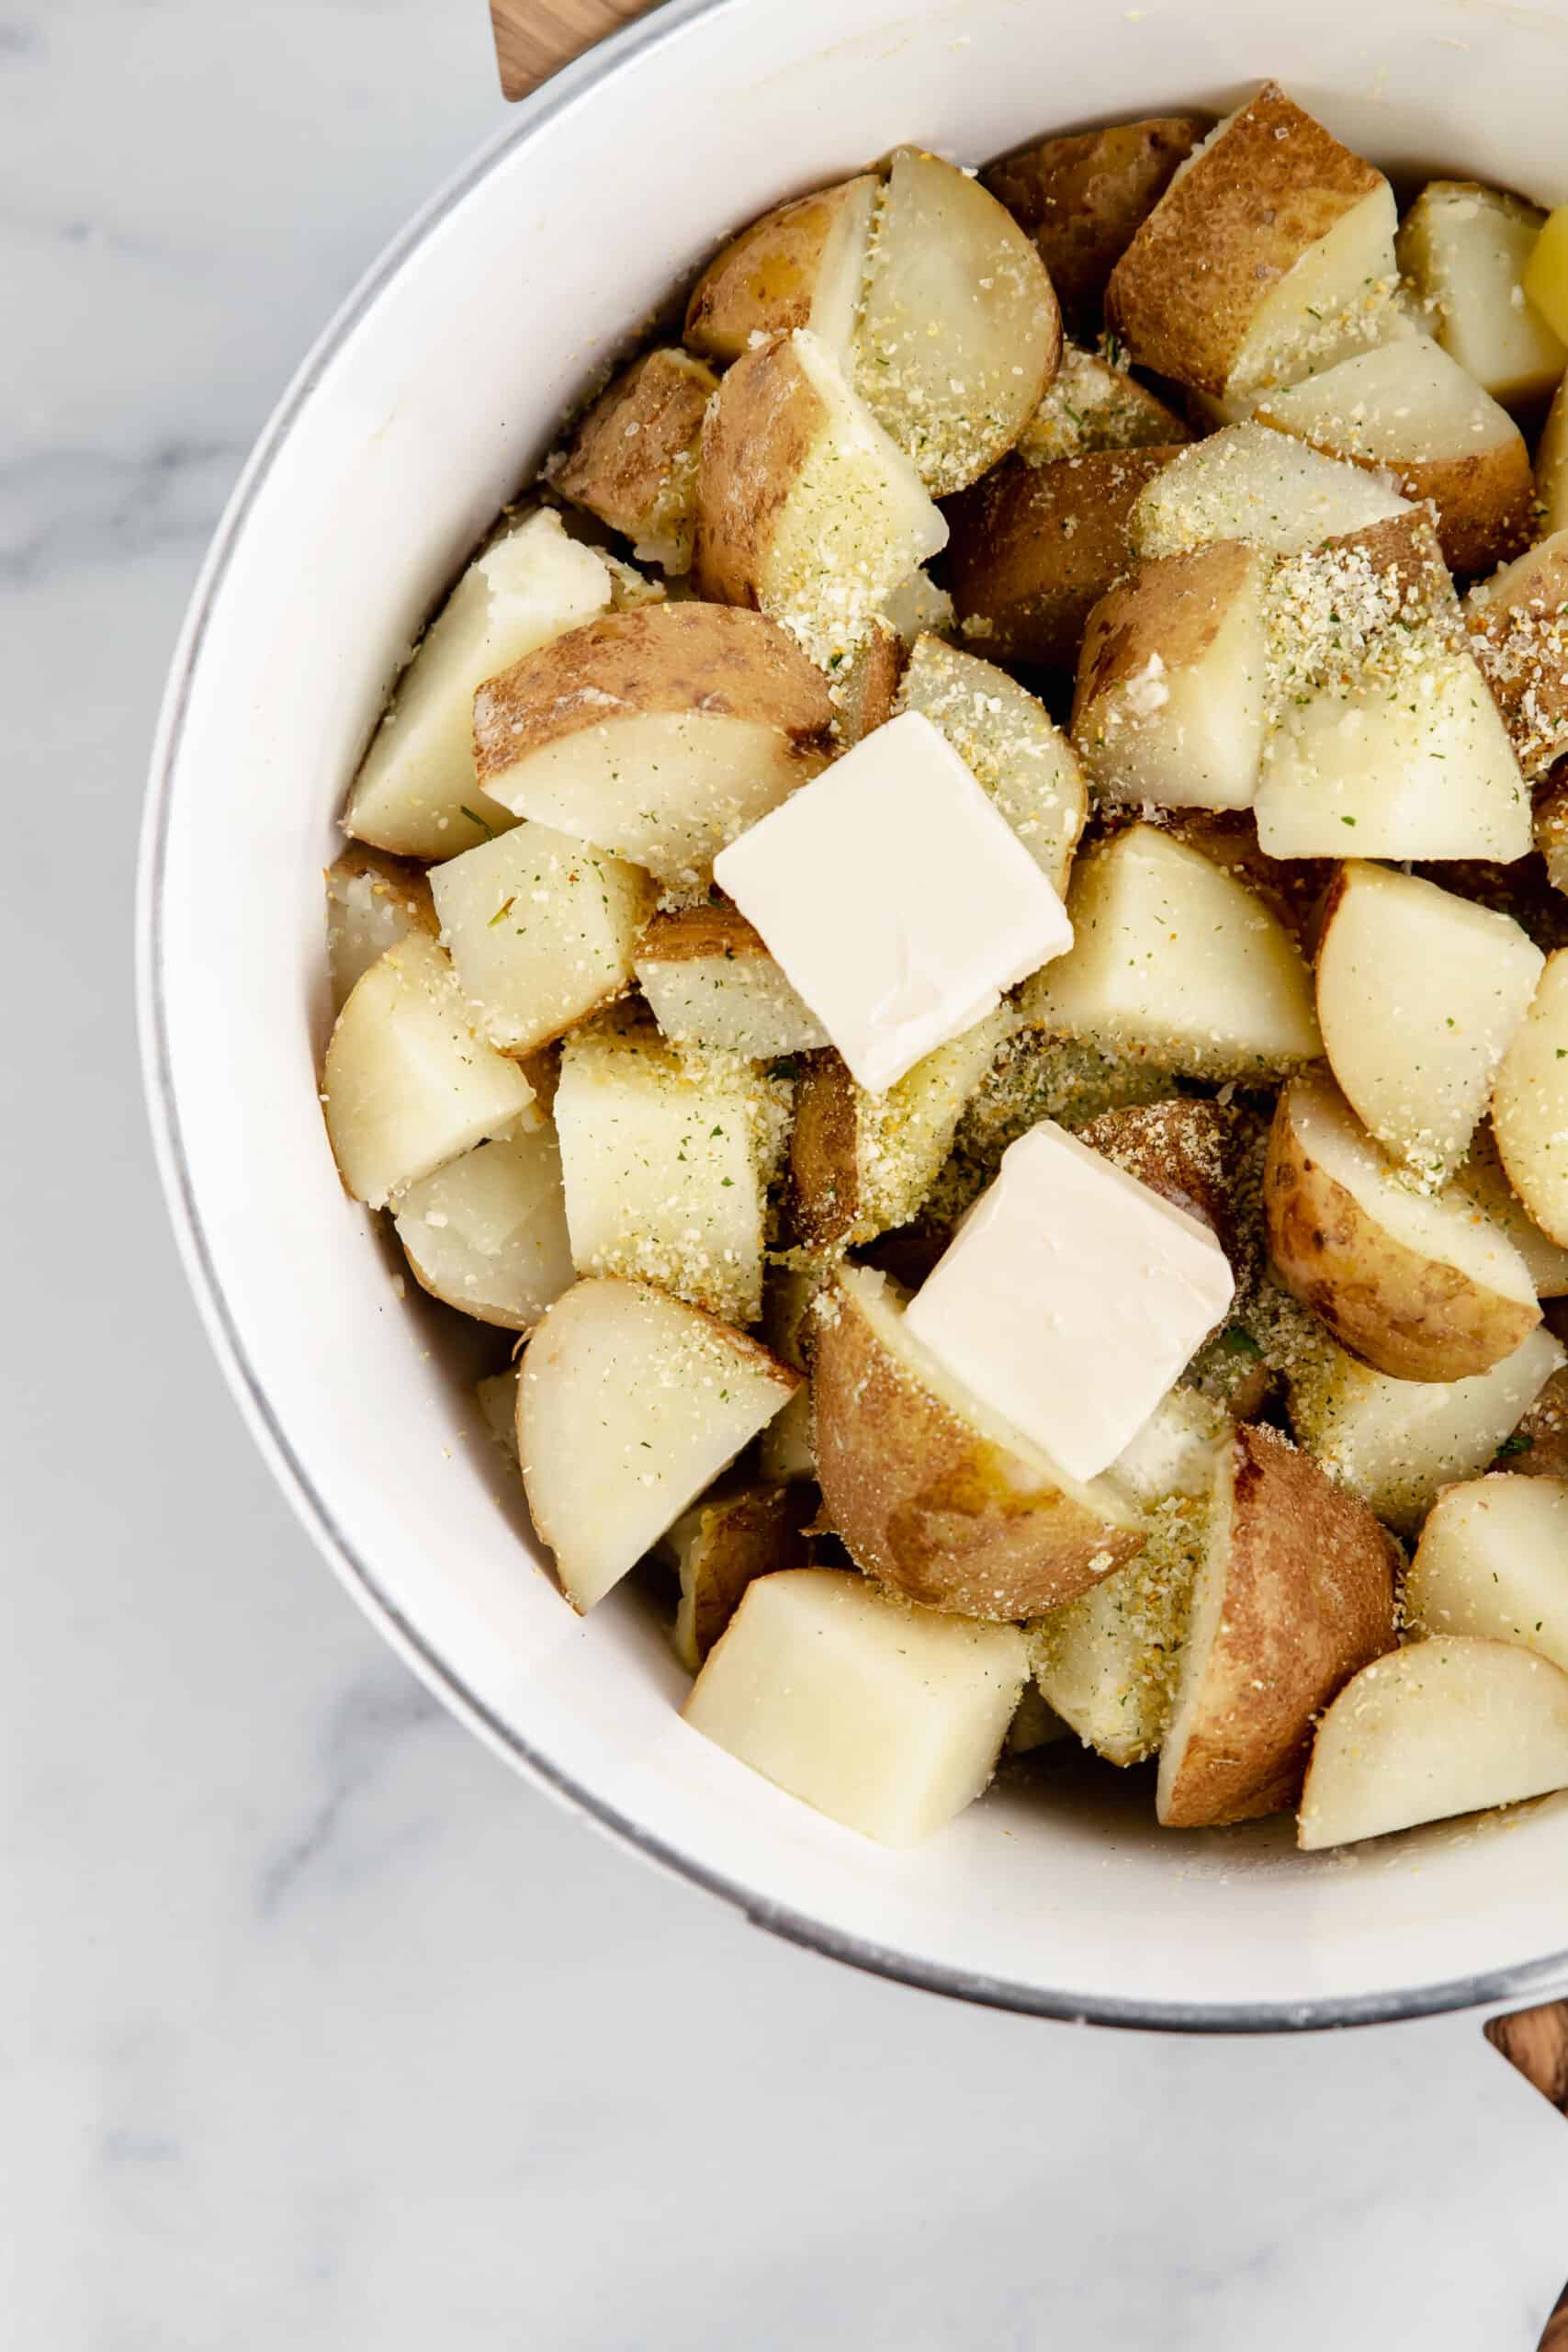 A bowl of diced potatoes with garlic salt and butter.